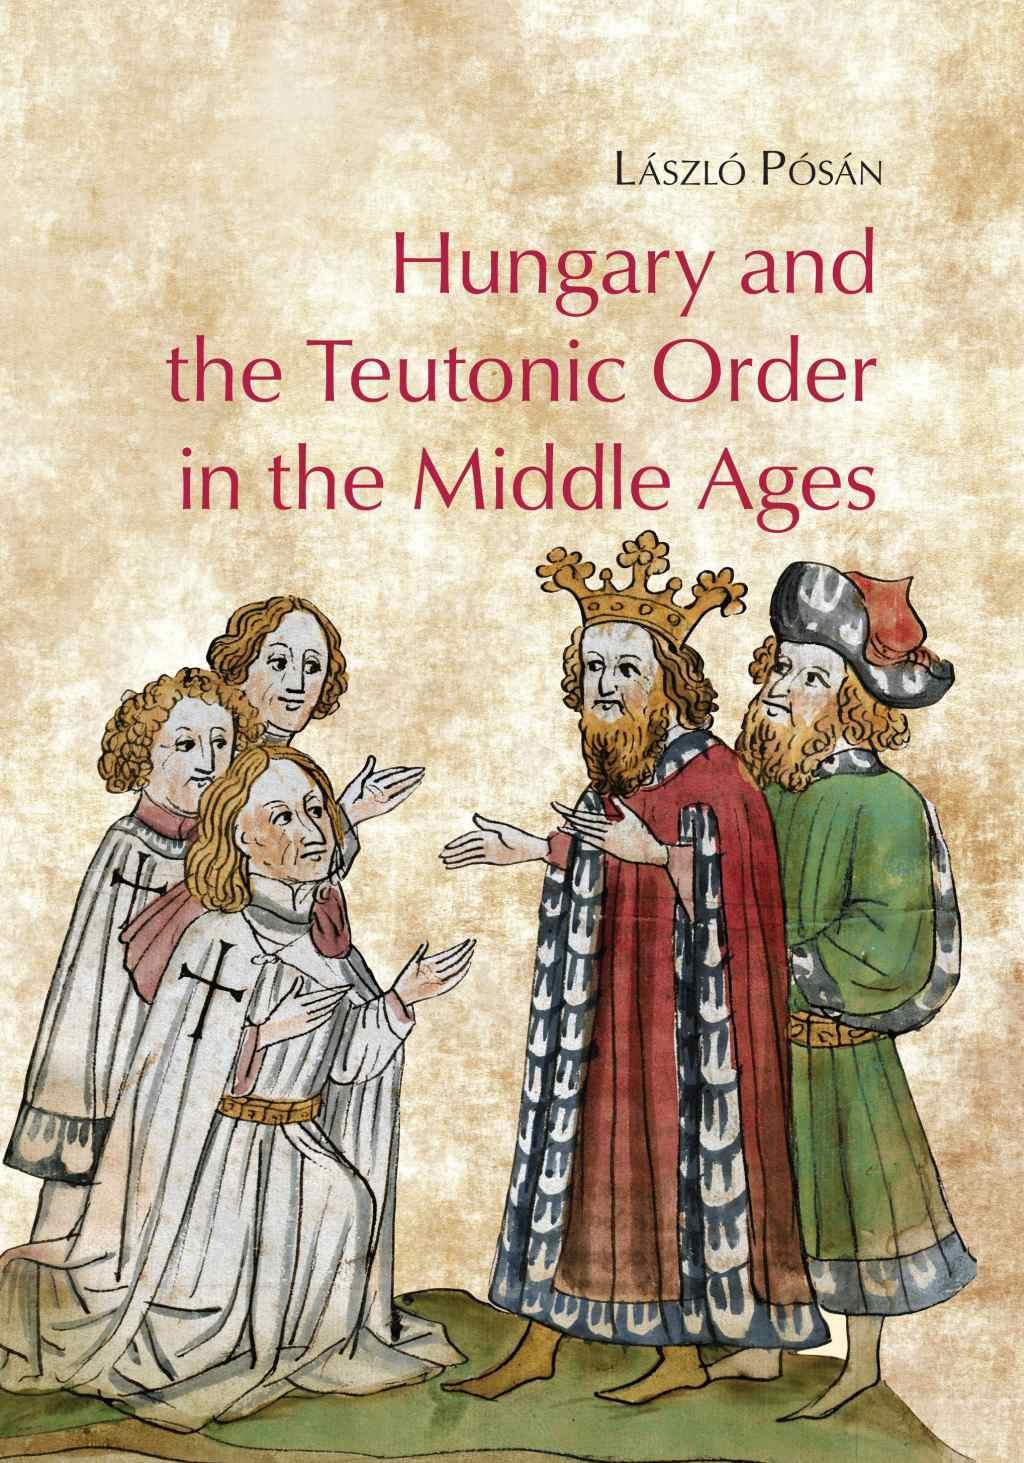 László Pósán - Hungary and the Teutonic Order in the Middle Ages